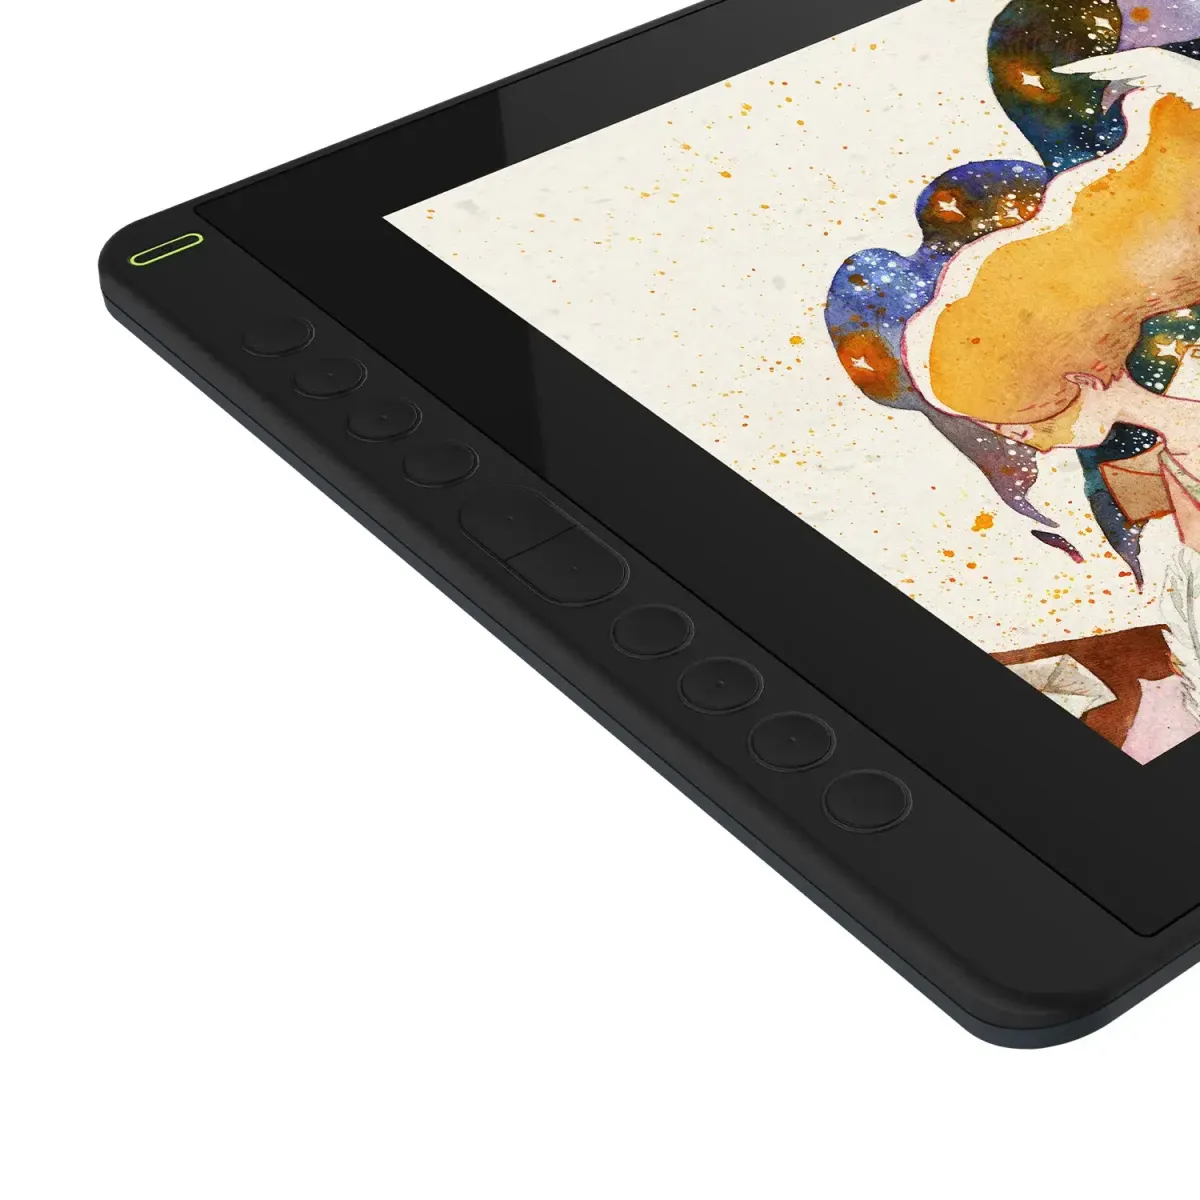 Huion HS64 Android Drawing Tablet for Beginners  Huion Official Store:  Drawing Tablets, Pen Tablets, Pen Display, Led Light Pad